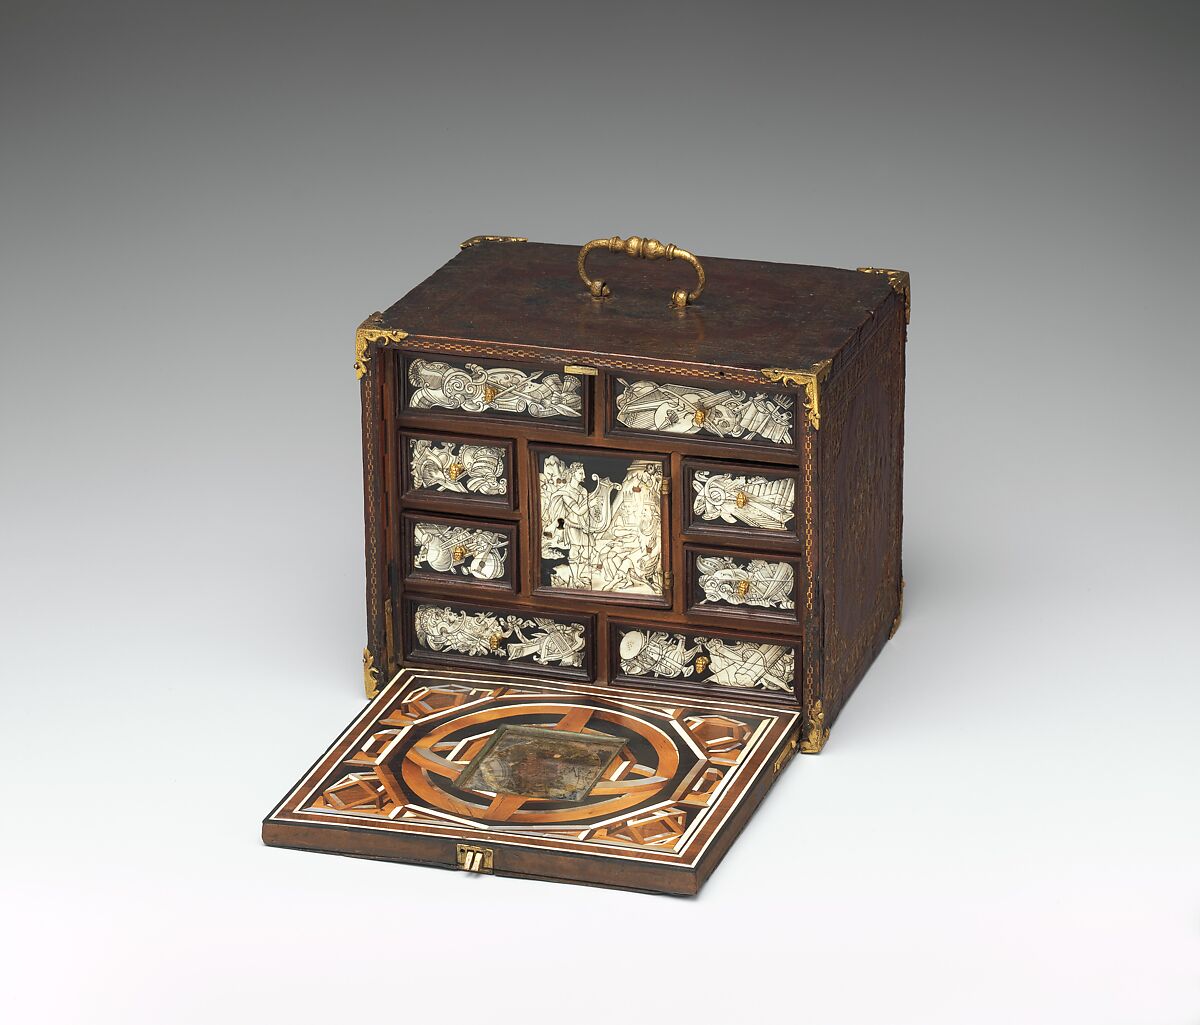 Miniature collector's cabinet, Bernard Salomon  French, Dyed and gold-tooled leather on secondary woods pine, poplar, pear, yew; veneers of ivory, mother-of-pearl, pear, plum, ebony, rosewood, holly, ash, green stained poplar; gilded metal; reverse-painted glass, German, possibly Nuremberg